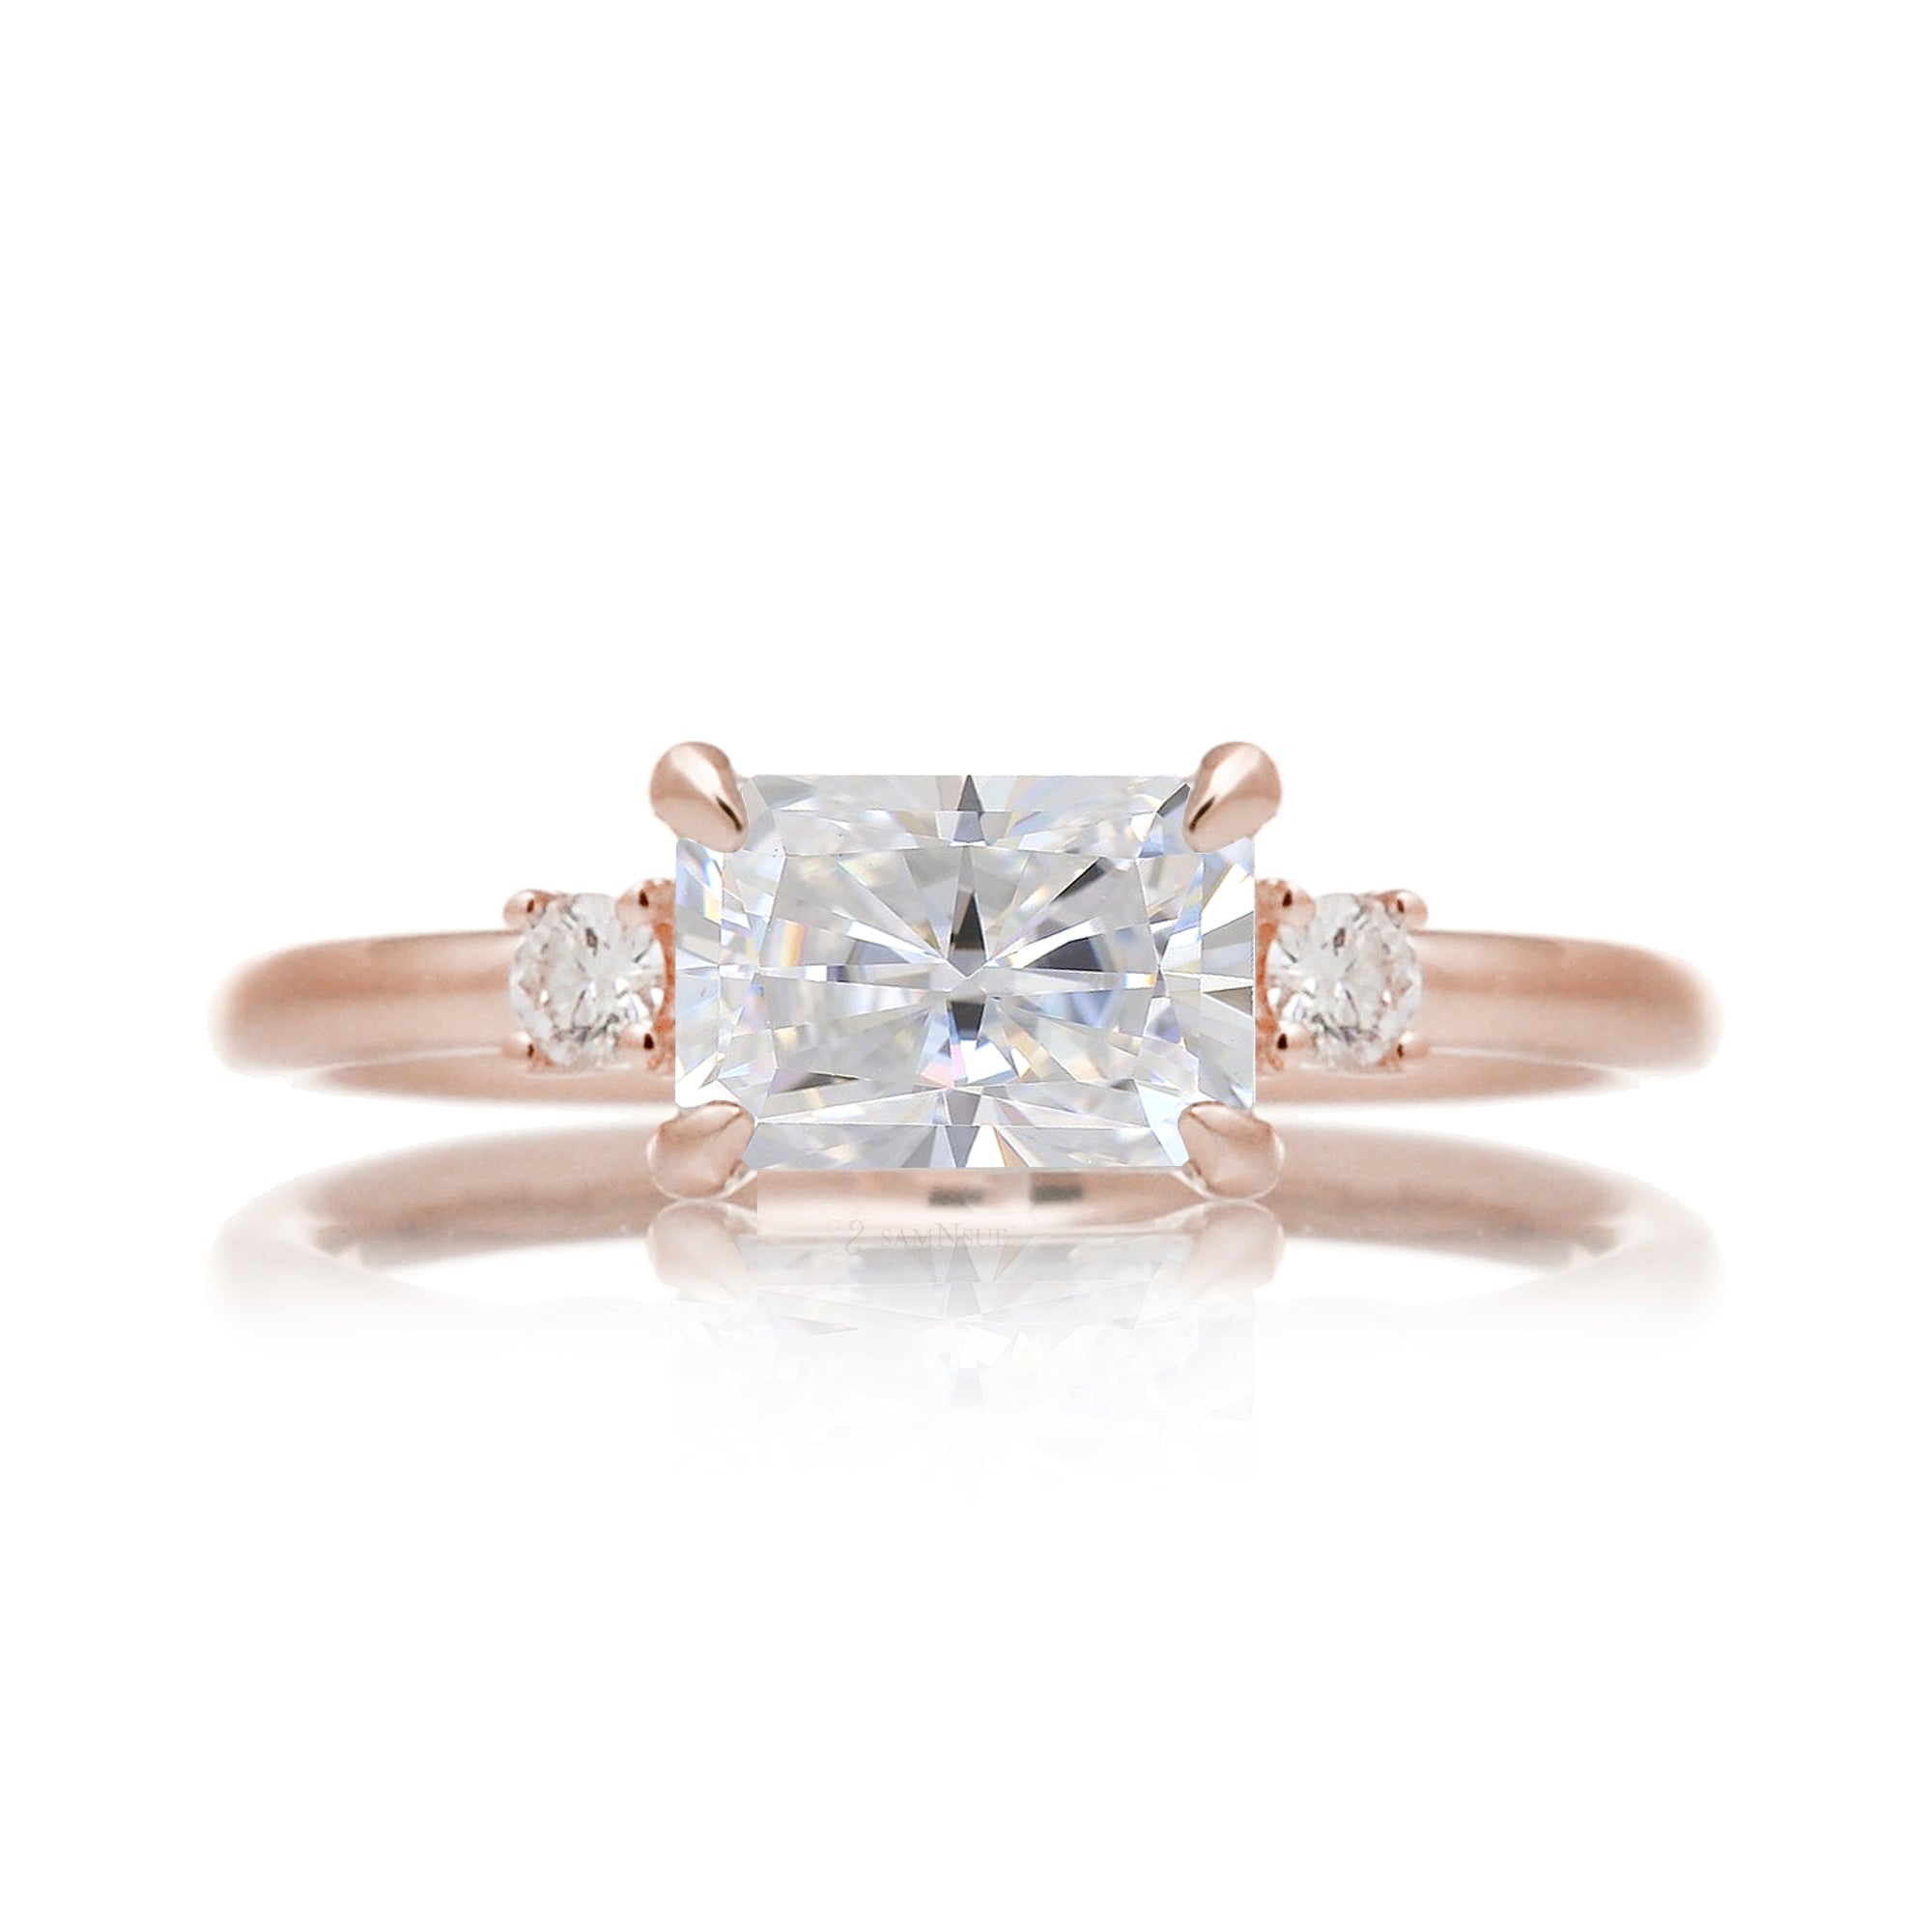 Radiant moissanite three stone east-west ring the Lena rose gold